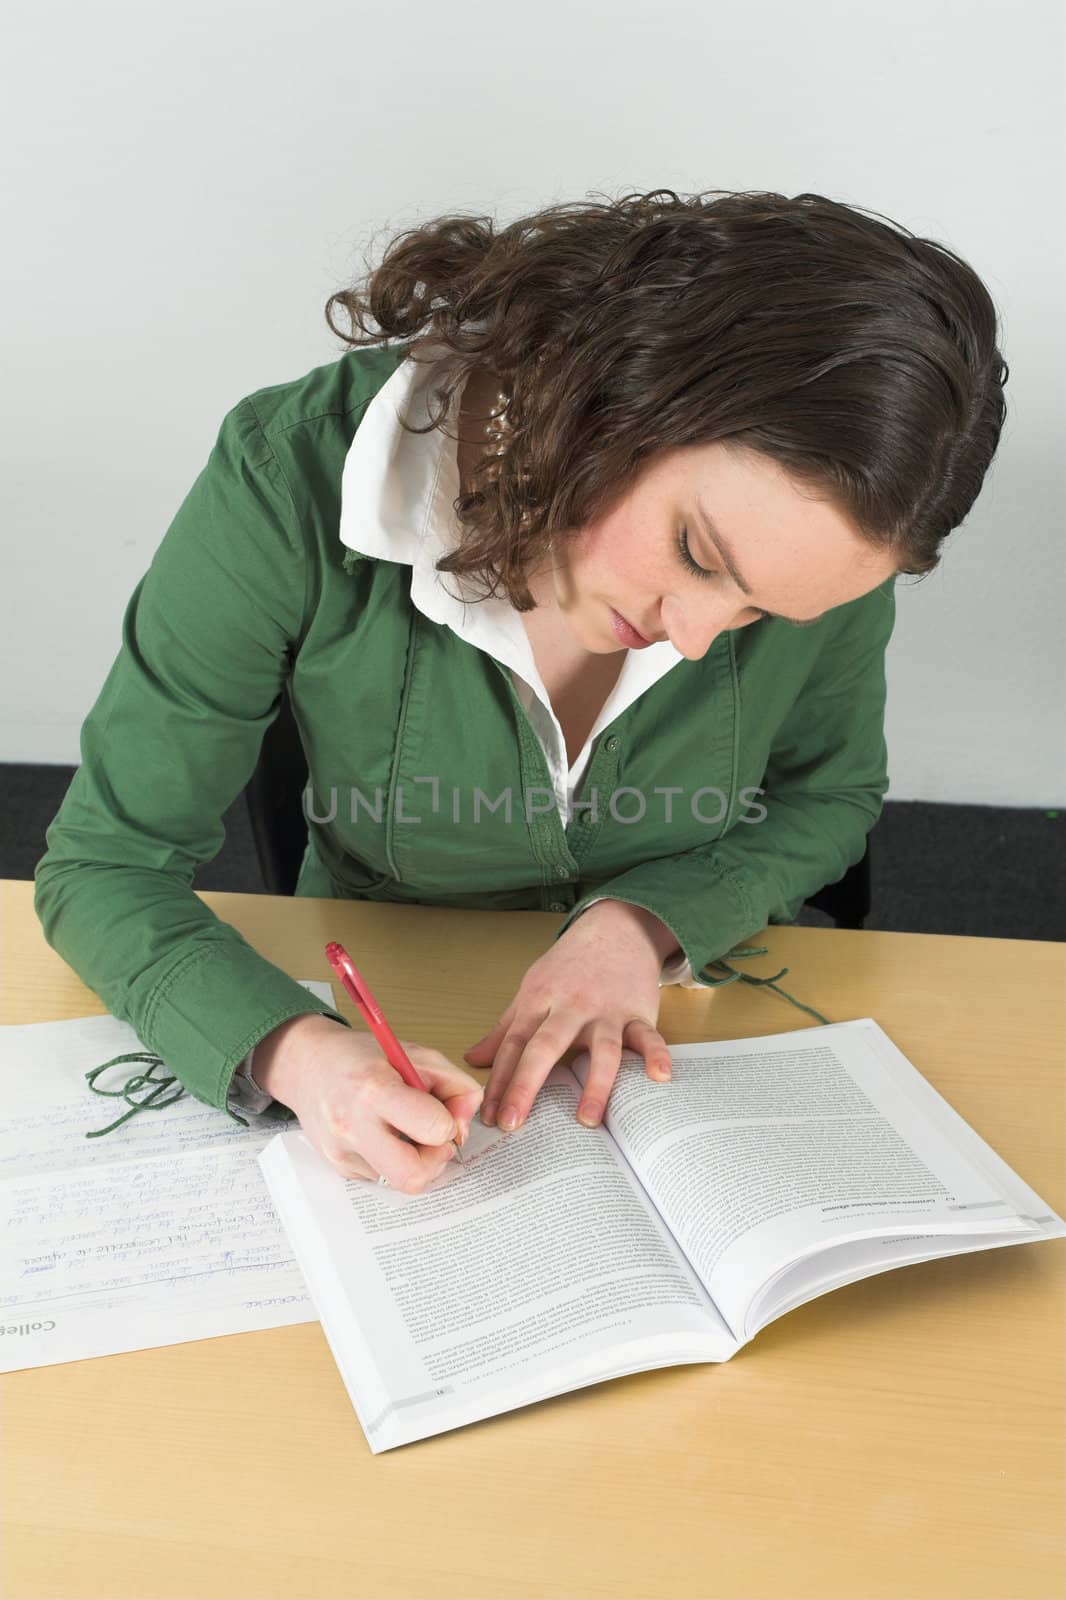 Teenager writing a little note to her friend while pretending to be learning